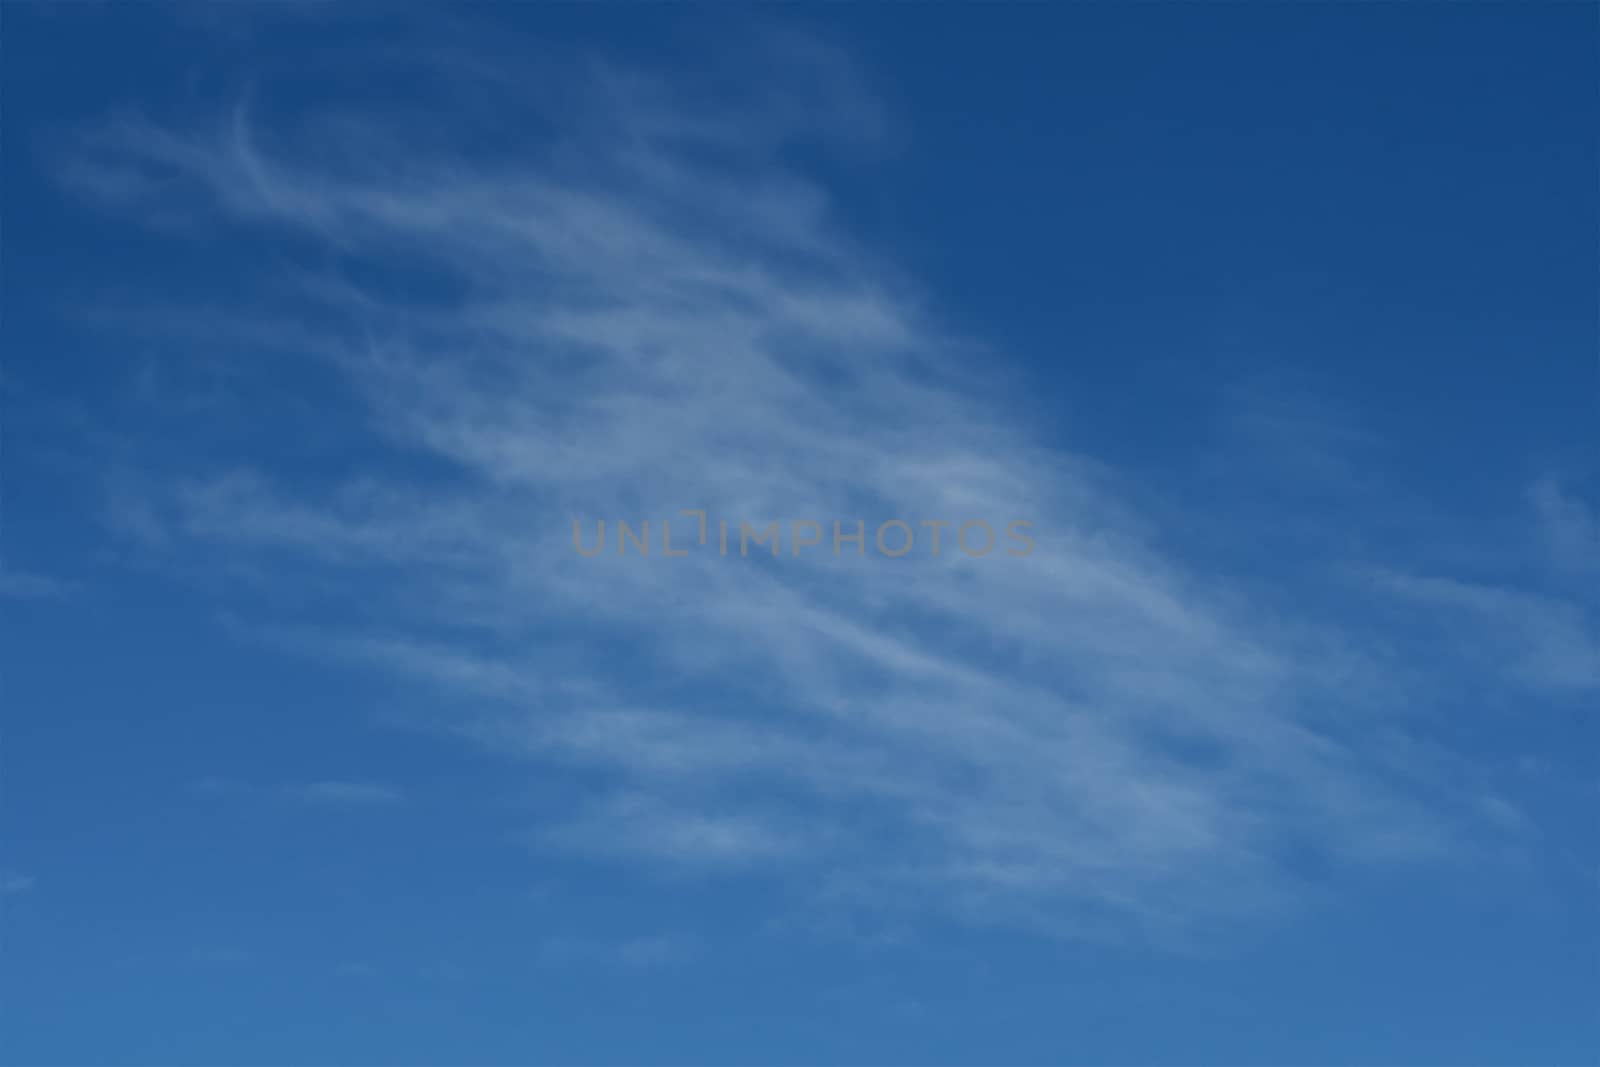 Clear blue sky with plain white cloud with space for text background. The vast blue sky and clouds